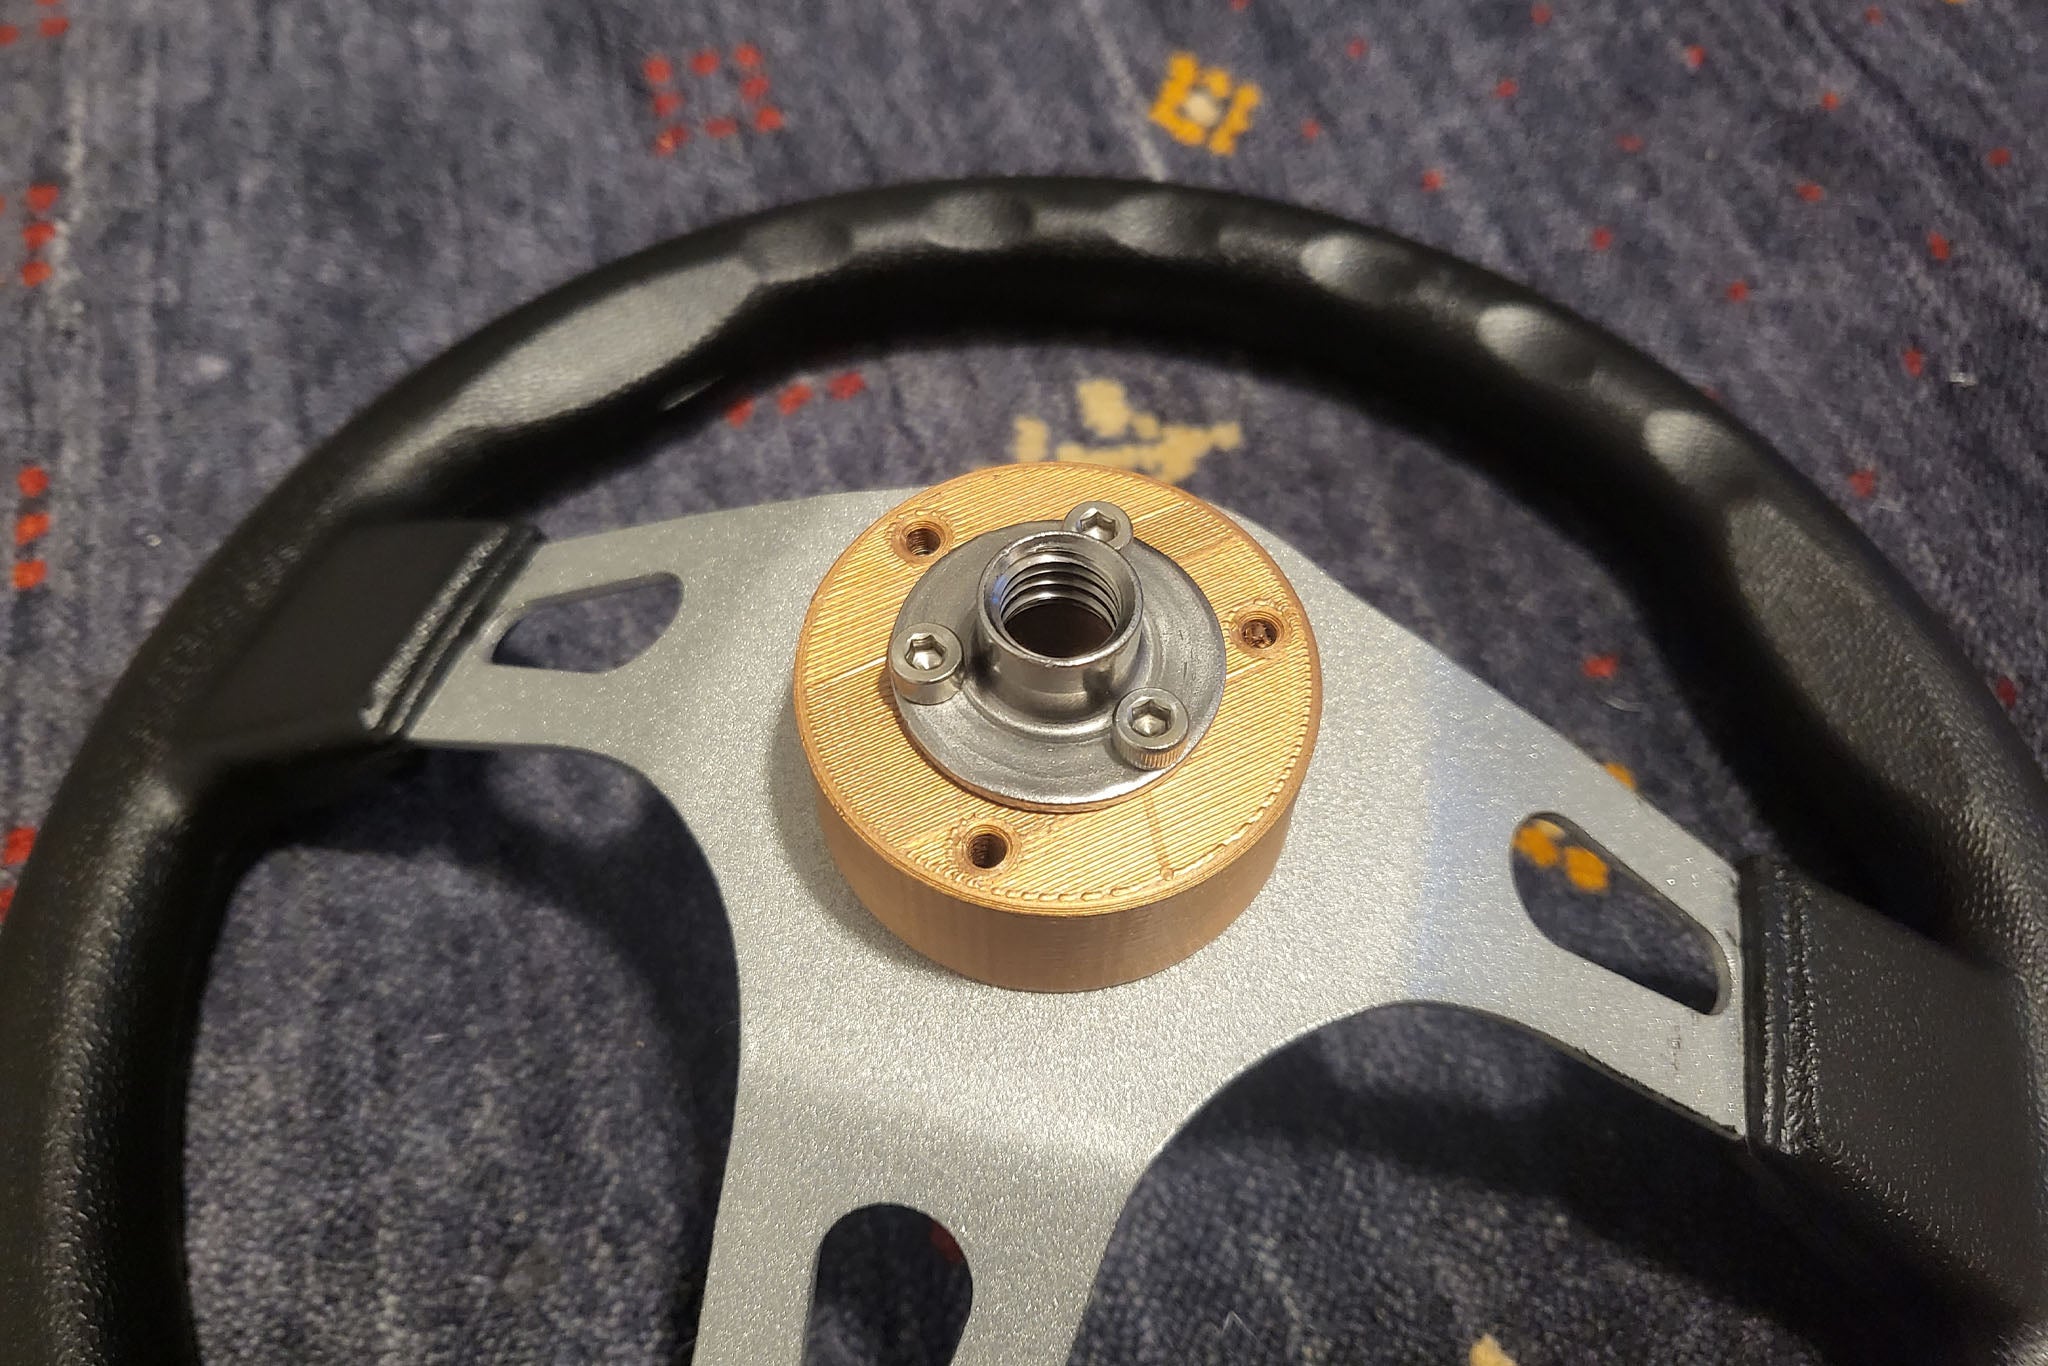 The only 3D-printed part of the kart is the steering adapter, which allows the wheel to bolt up to the smaller screw-mount nuts I used for most of the steering.